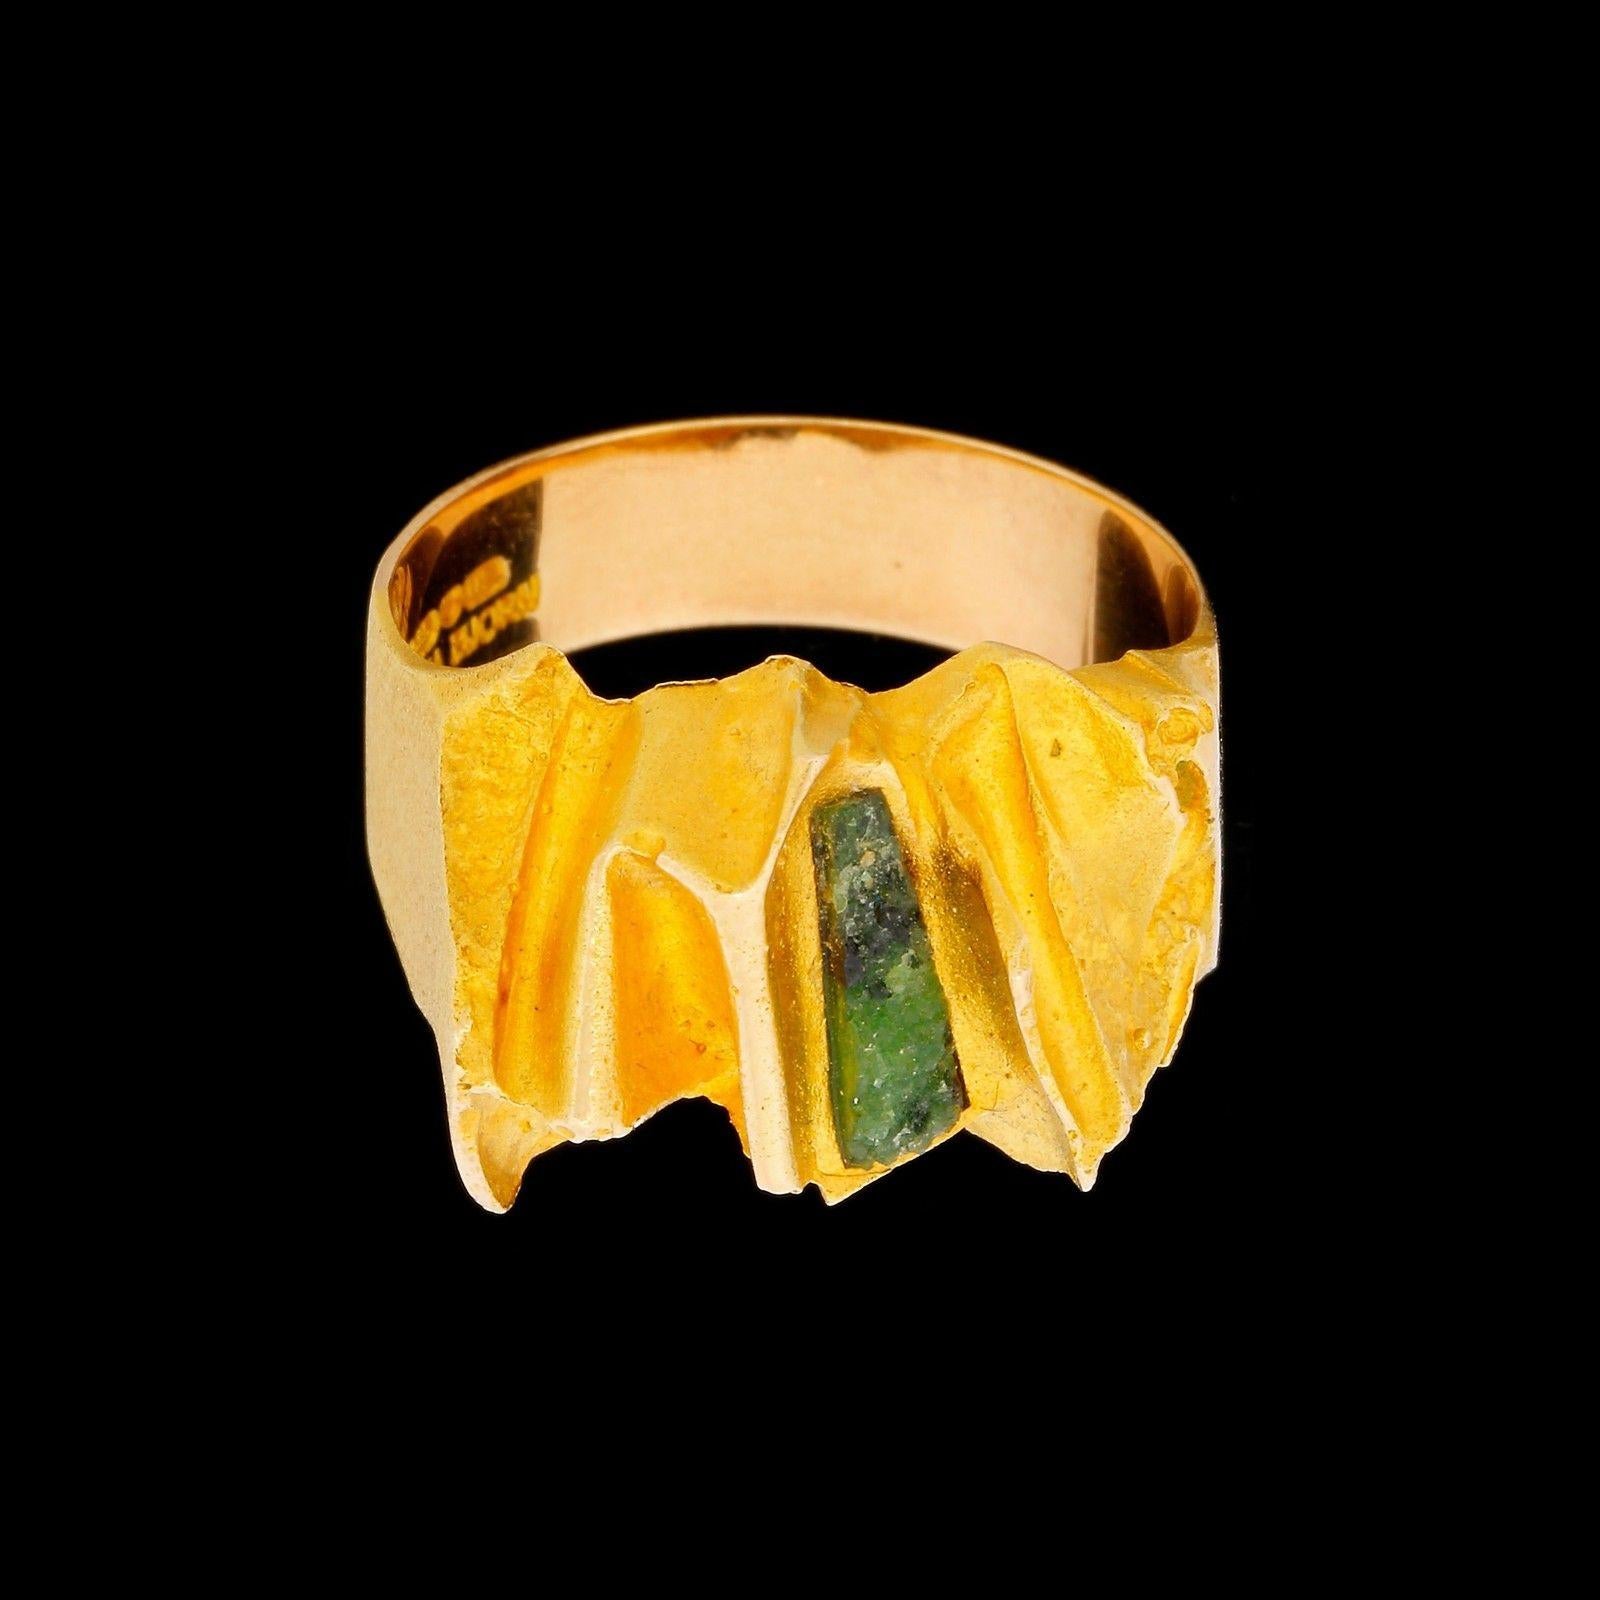 Very fine Brutalist Movement 14k Yellow Gold and Green Tourmaline Rough unisex ring designed by Bjorn Weckstrom Lapponia from Helsinki, Finland, in 1973. 
This amazing vintage Lapponia ring has a baguette shaped piece of green tourmaline which looks